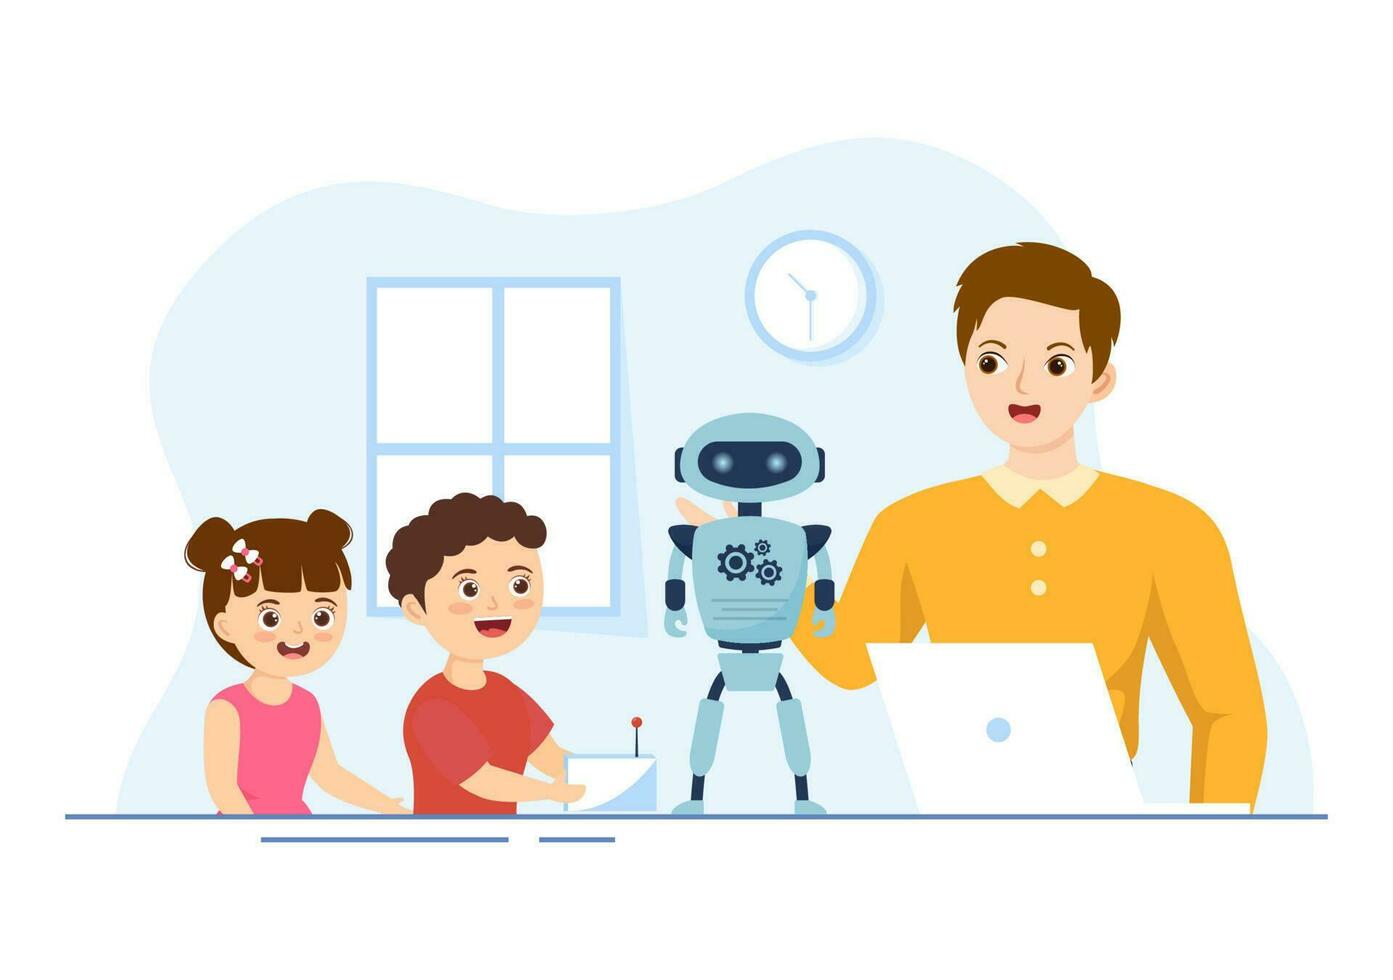 Robotics School Vector Illustration with Kids Robotic Project to Programming and Engineering Robot in Flat Cartoon Hand Drawn Landing Page Templates